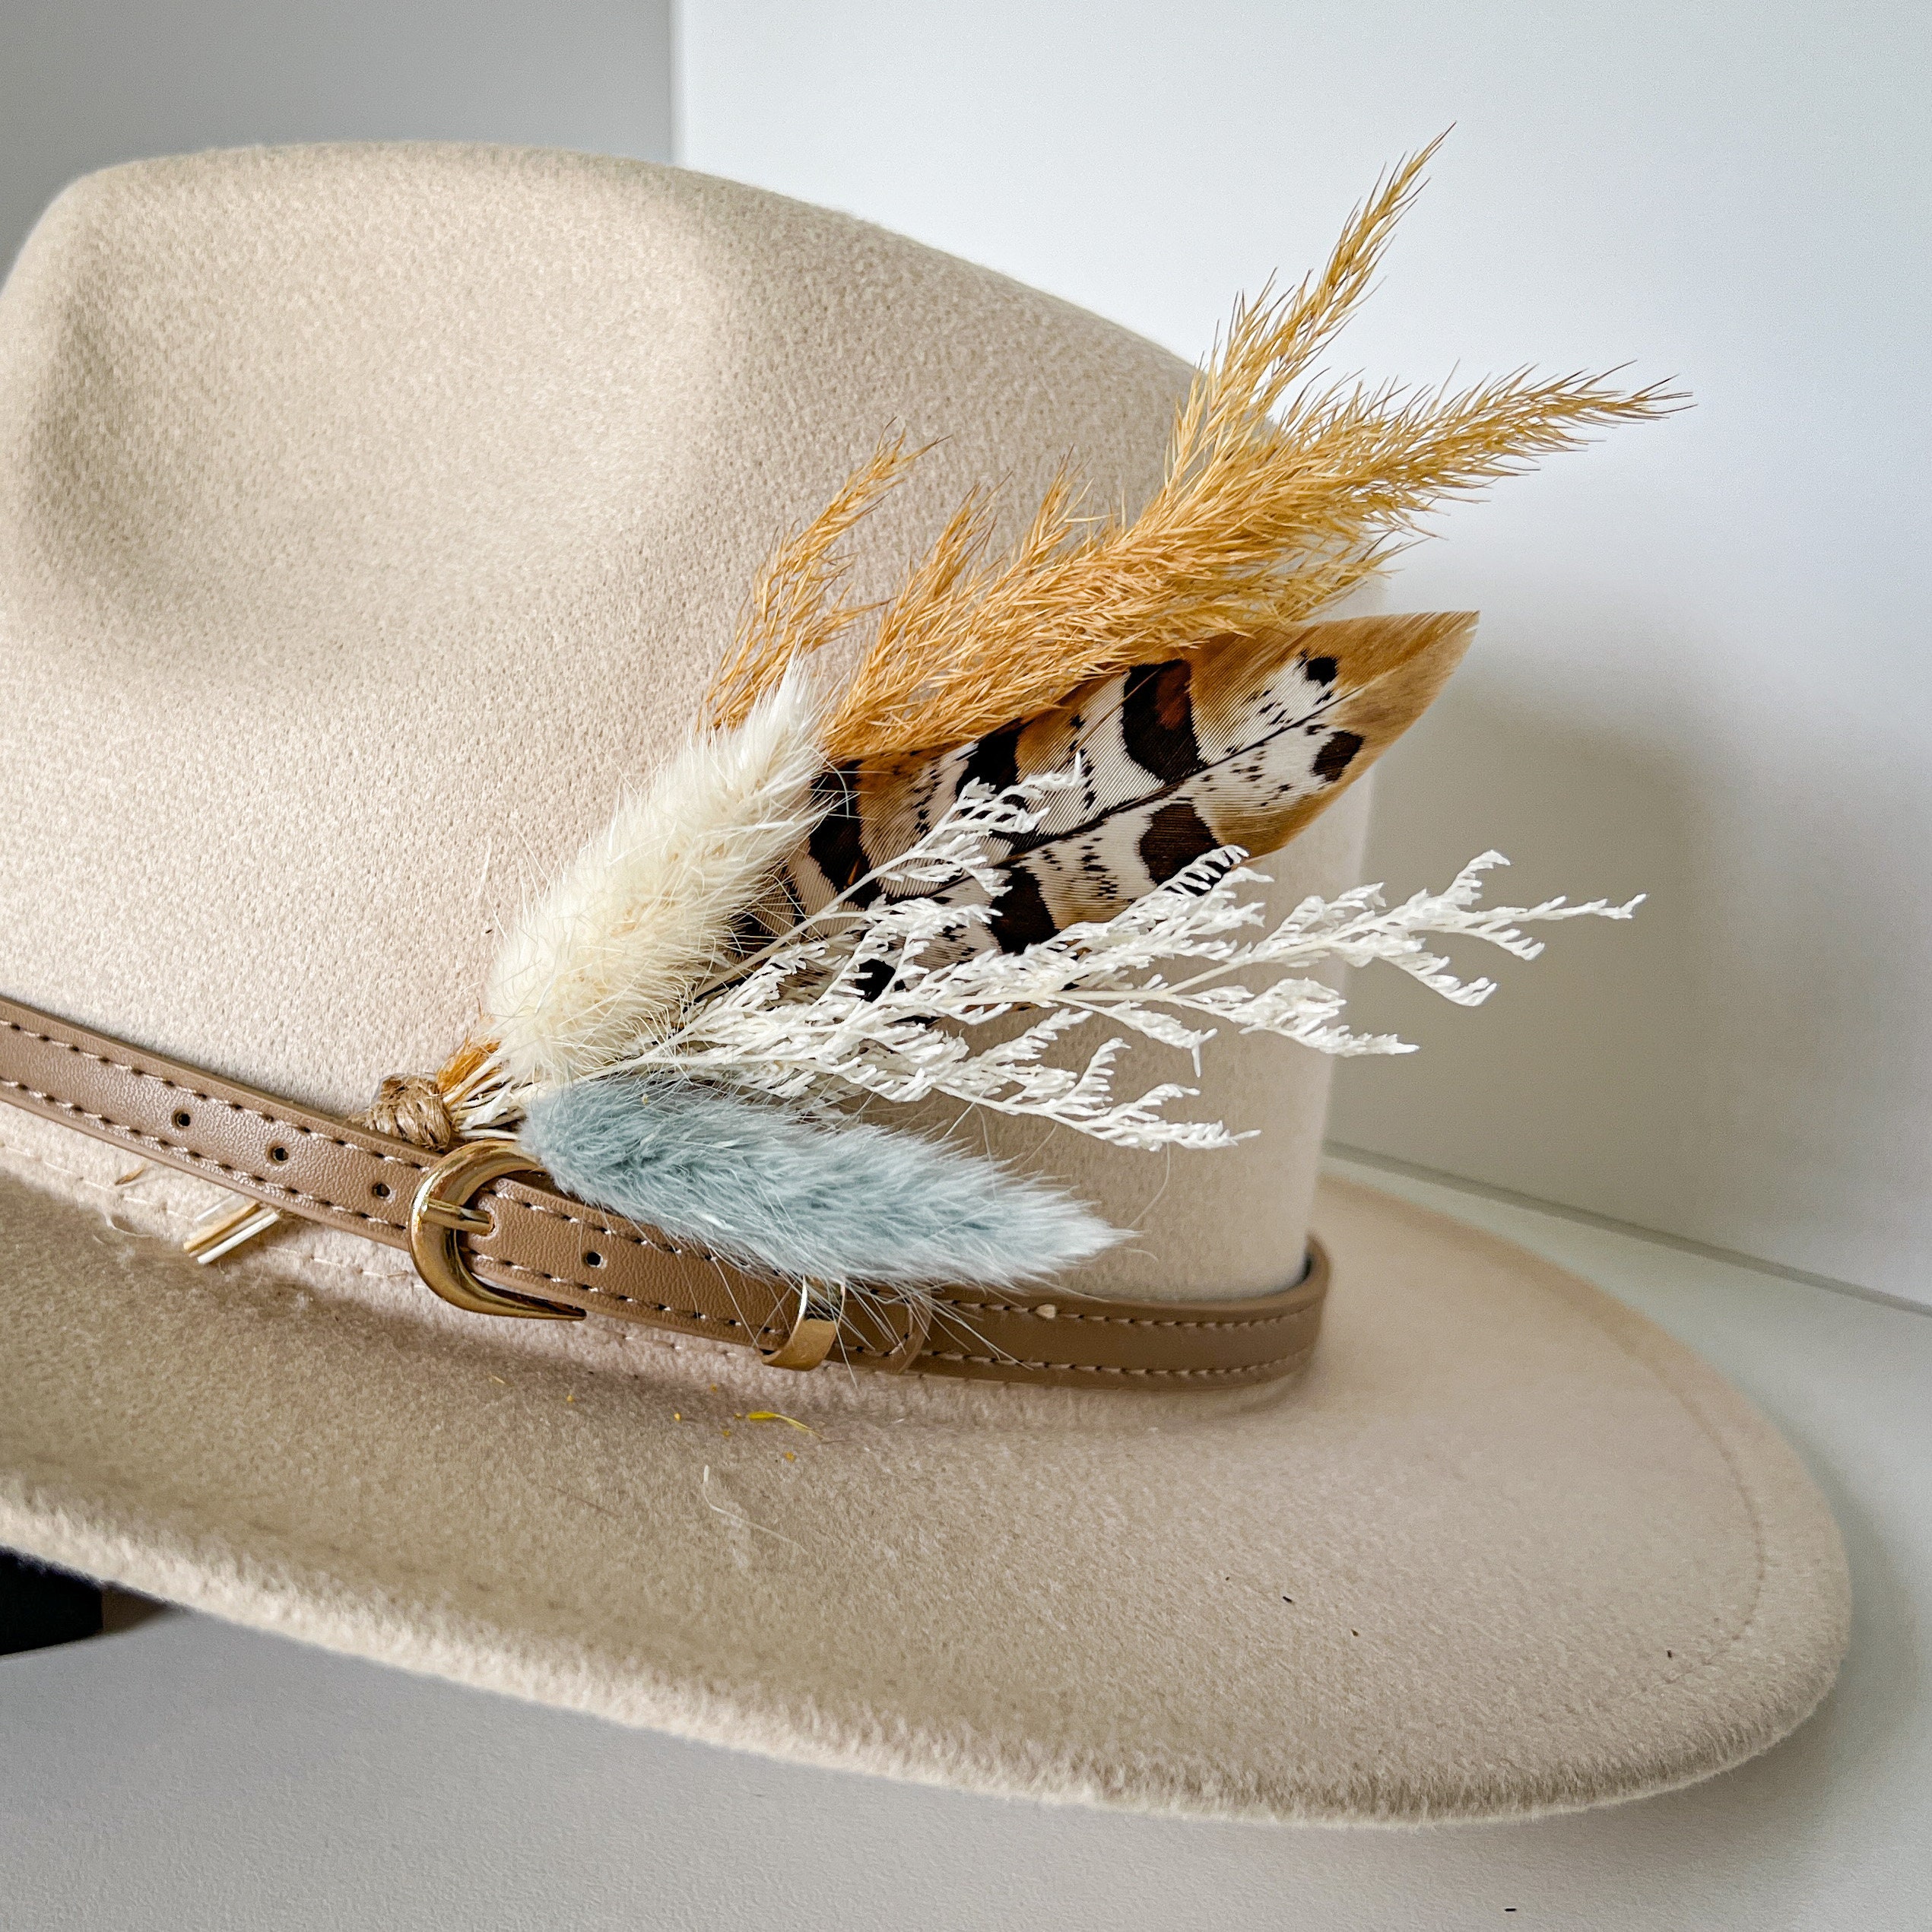 Hat Feathers, Feathers for Hat, Dried Flowers and Feather Accent, Feathers  for Fedora, Cowboy Hat, or Floppy Hat BLUE AND GOLD 